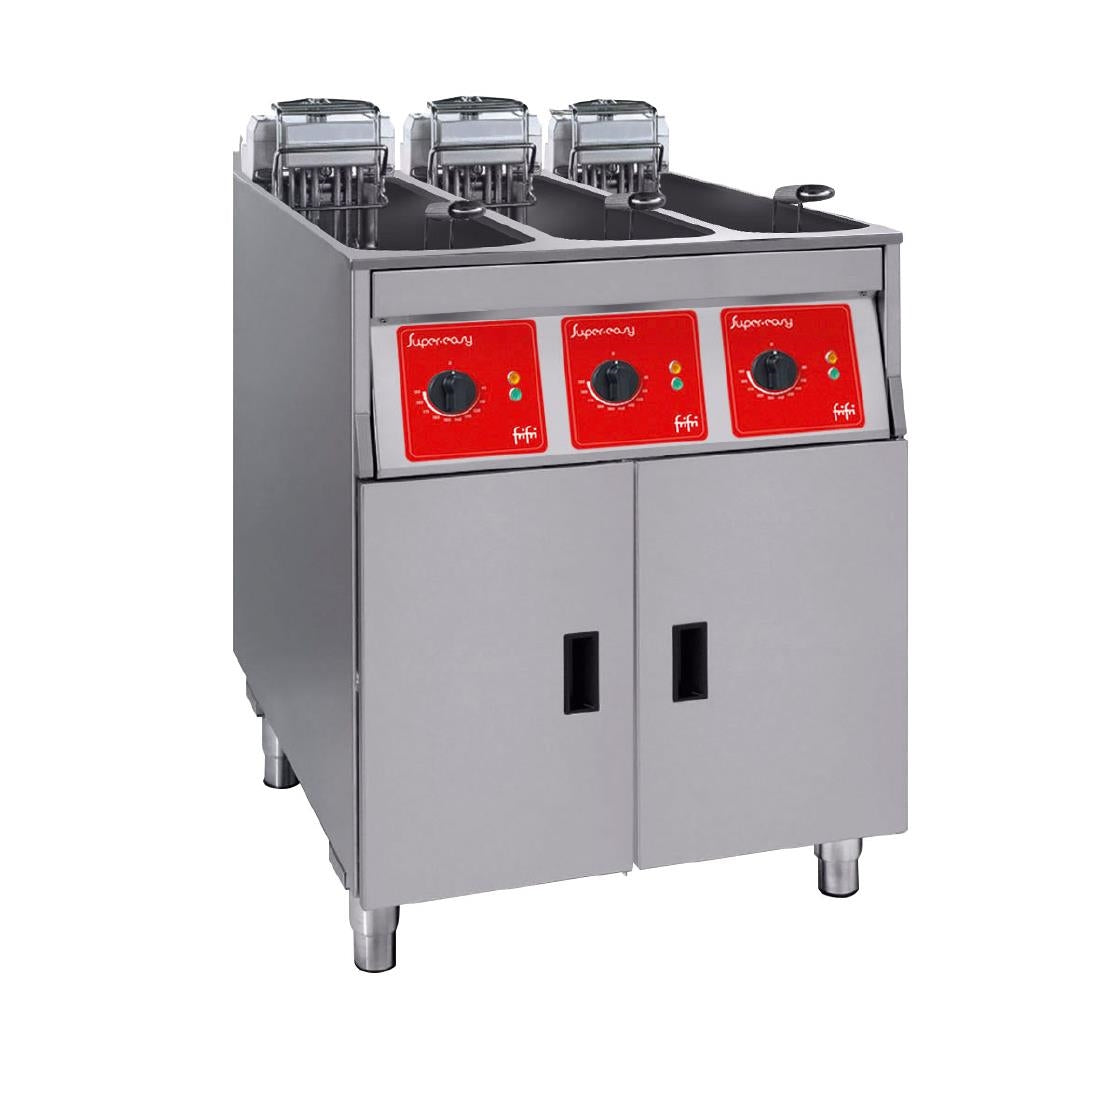 HS074-3PH FriFri Super Easy 633 Electric Free-standing Fryer Triple Tank Triple Basket with Filtration 3x7.5kW Three Phase